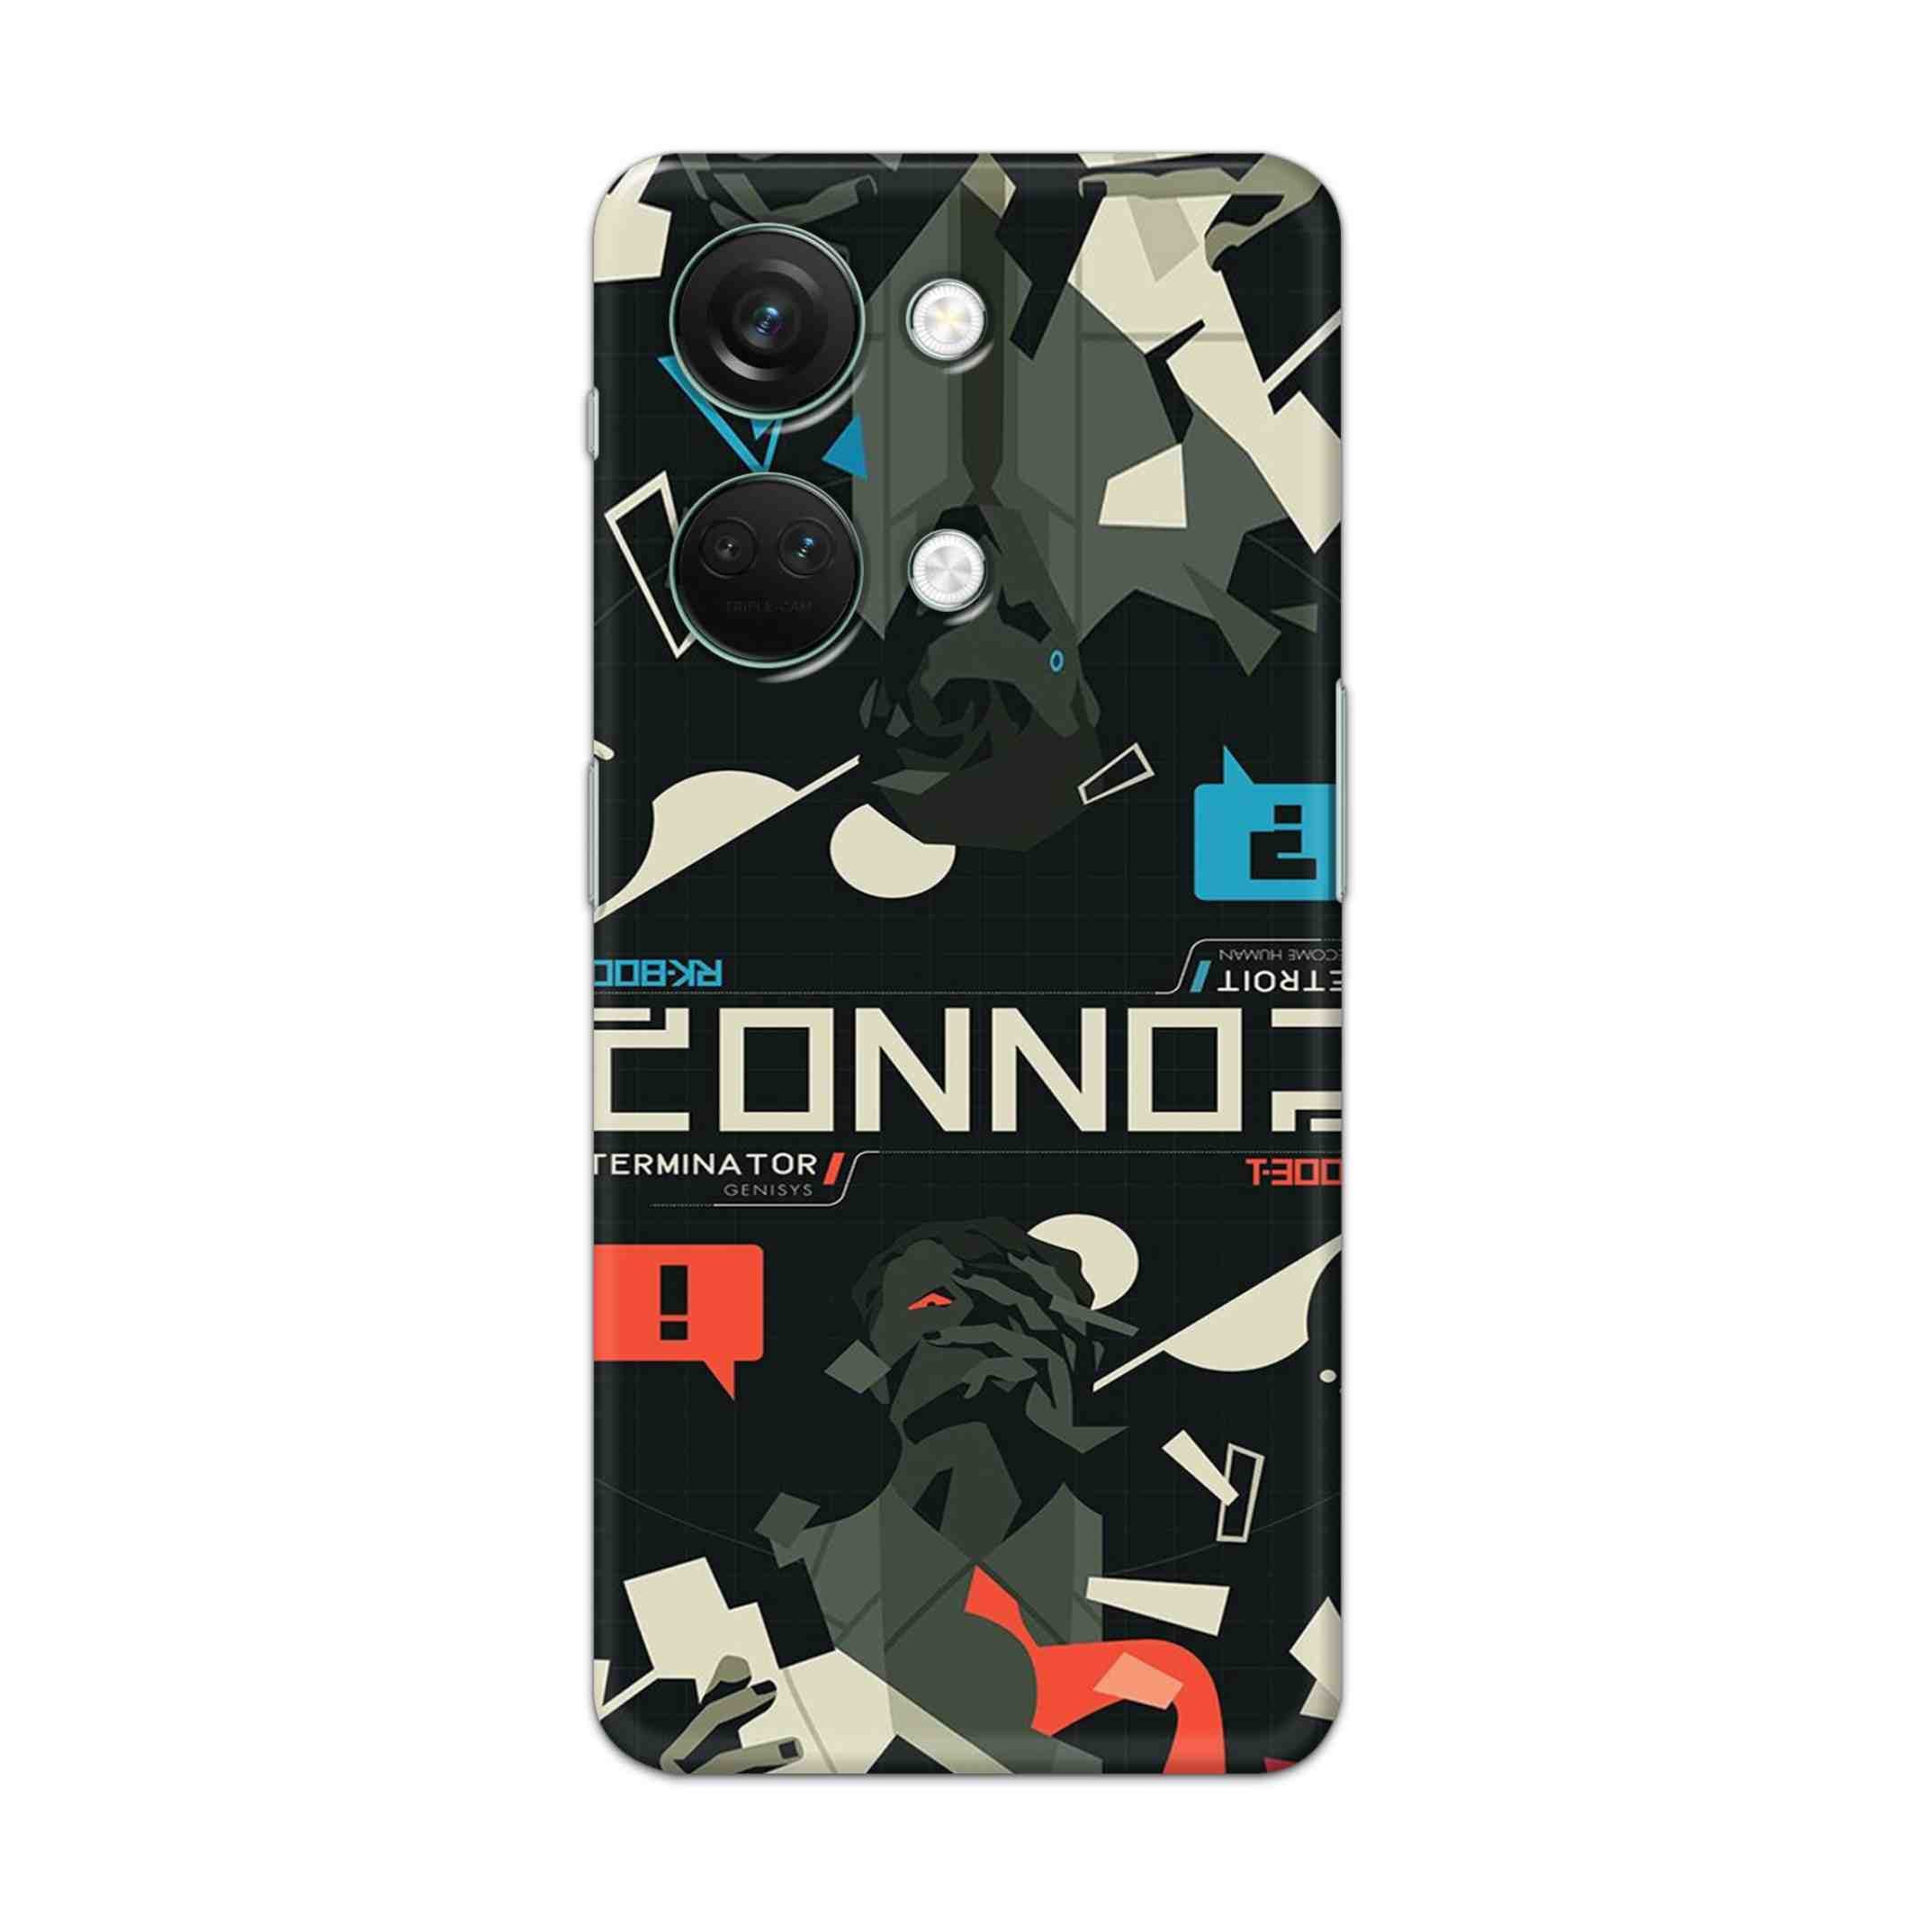 Buy Terminator Hard Back Mobile Phone Case Cover For Oneplus Nord 3 Online